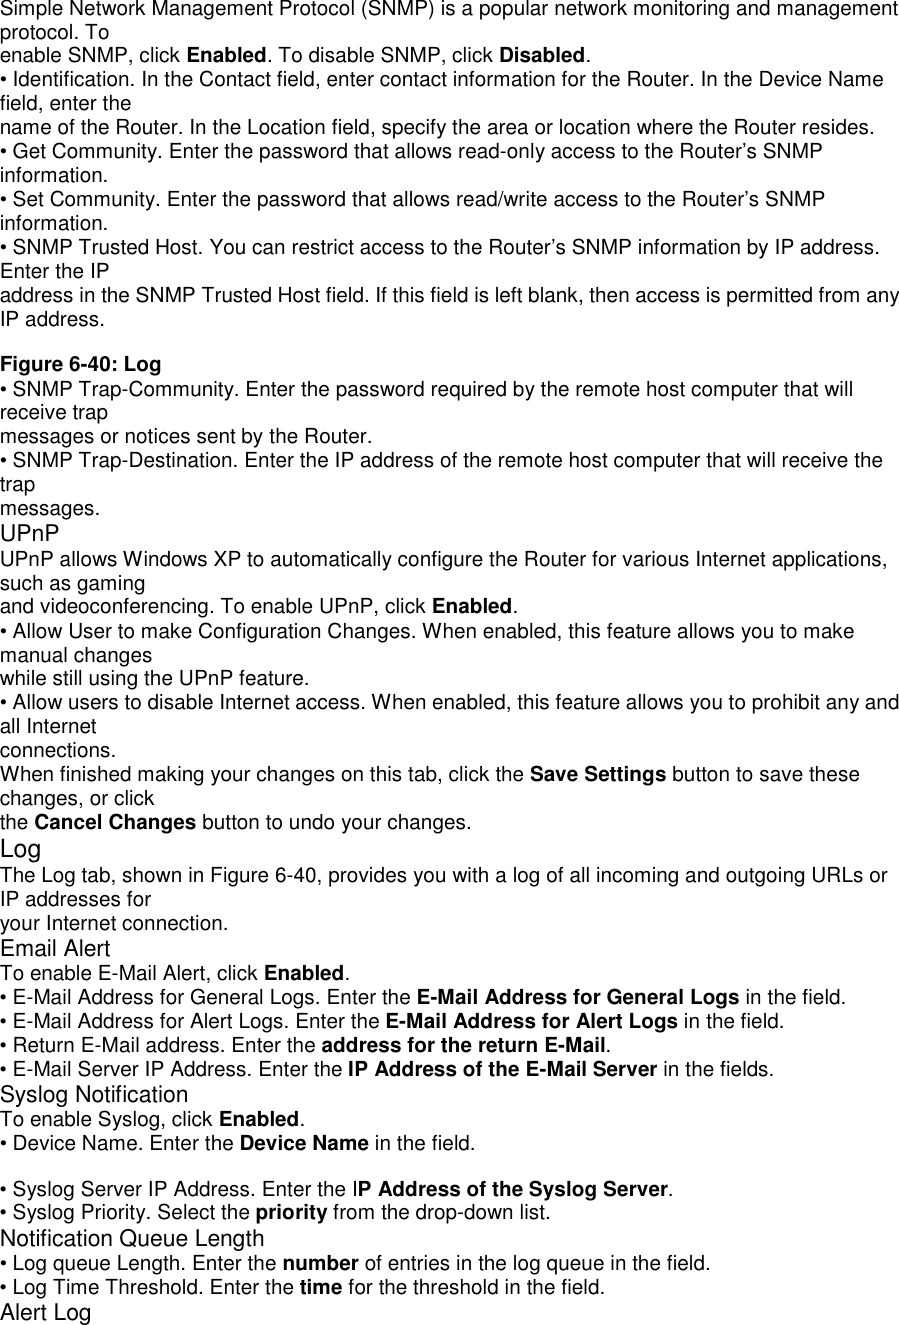 Simple Network Management Protocol (SNMP) is a popular network monitoring and managementprotocol. Toenable SNMP, click Enabled. To disable SNMP, click Disabled.• Identification. In the Contact field, enter contact information for the Router. In the Device Namefield, enter thename of the Router. In the Location field, specify the area or location where the Router resides.• Get Community. Enter the password that allows read-only access to the Router’s SNMPinformation.• Set Community. Enter the password that allows read/write access to the Router’s SNMPinformation.• SNMP Trusted Host. You can restrict access to the Router’s SNMP information by IP address.Enter the IPaddress in the SNMP Trusted Host field. If this field is left blank, then access is permitted from anyIP address.Figure 6-40: Log• SNMP Trap-Community. Enter the password required by the remote host computer that willreceive trapmessages or notices sent by the Router.• SNMP Trap-Destination. Enter the IP address of the remote host computer that will receive thetrapmessages.UPnPUPnP allows Windows XP to automatically configure the Router for various Internet applications,such as gamingand videoconferencing. To enable UPnP, click Enabled.• Allow User to make Configuration Changes. When enabled, this feature allows you to makemanual changeswhile still using the UPnP feature.• Allow users to disable Internet access. When enabled, this feature allows you to prohibit any andall Internetconnections.When finished making your changes on this tab, click the Save Settings button to save thesechanges, or clickthe Cancel Changes button to undo your changes.LogThe Log tab, shown in Figure 6-40, provides you with a log of all incoming and outgoing URLs orIP addresses foryour Internet connection.Email AlertTo enable E-Mail Alert, click Enabled.• E-Mail Address for General Logs. Enter the E-Mail Address for General Logs in the field.• E-Mail Address for Alert Logs. Enter the E-Mail Address for Alert Logs in the field.• Return E-Mail address. Enter the address for the return E-Mail.• E-Mail Server IP Address. Enter the IP Address of the E-Mail Server in the fields.Syslog NotificationTo enable Syslog, click Enabled.• Device Name. Enter the Device Name in the field.• Syslog Server IP Address. Enter the IP Address of the Syslog Server.• Syslog Priority. Select the priority from the drop-down list.Notification Queue Length• Log queue Length. Enter the number of entries in the log queue in the field.• Log Time Threshold. Enter the time for the threshold in the field.Alert Log